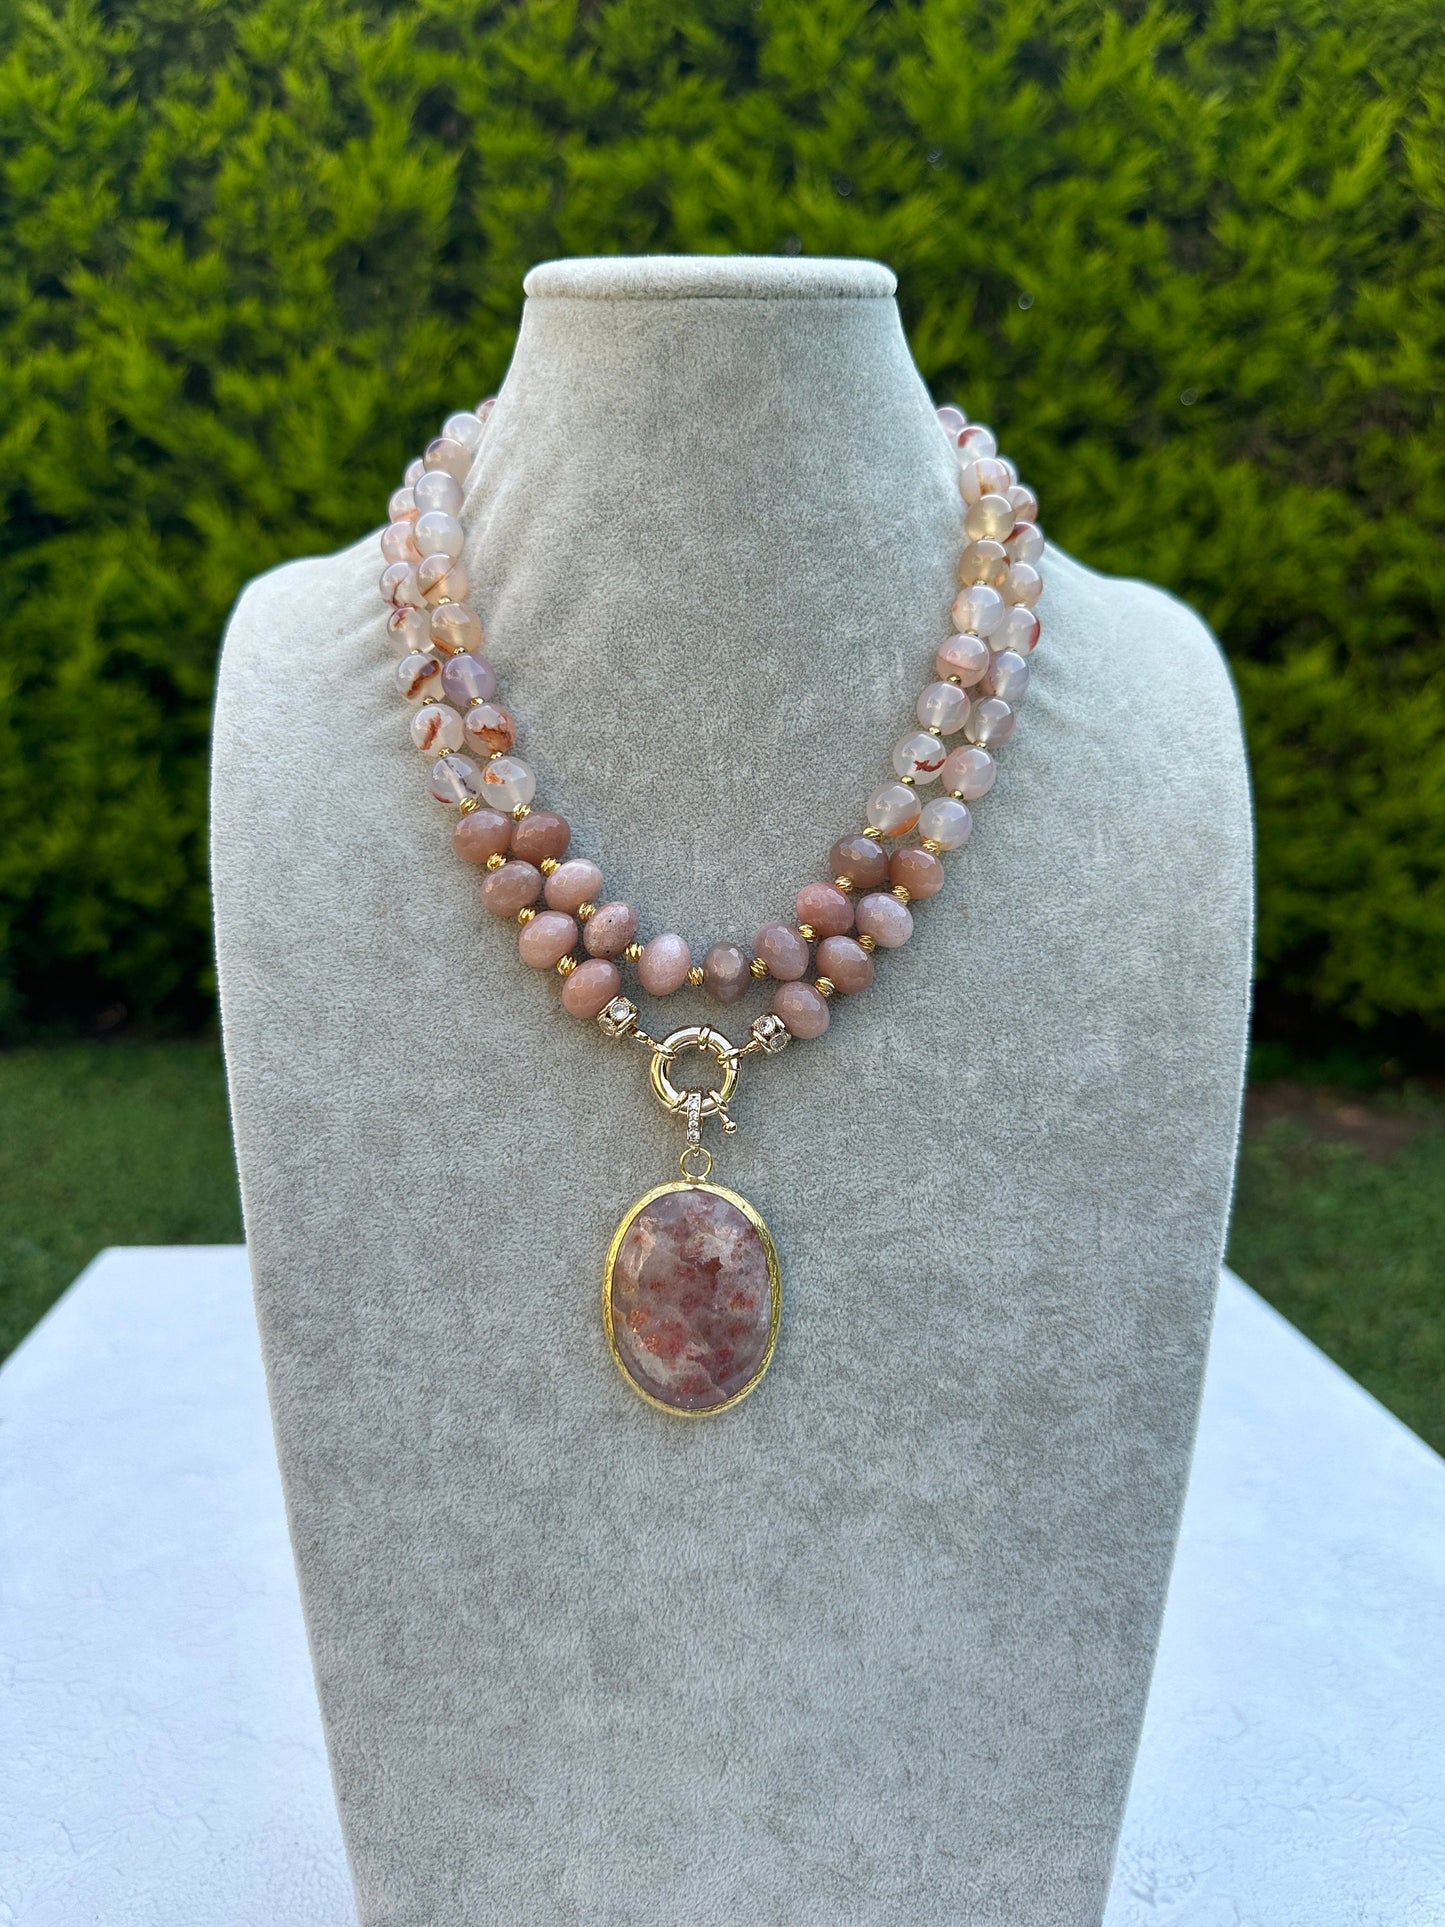 Agate Necklace, Handmade Sun Stone Jewelry, Unique Birthday Gift for Wife, Big Bold Statement Necklace, Summer Jewelry, Pink Gemstone Jewel